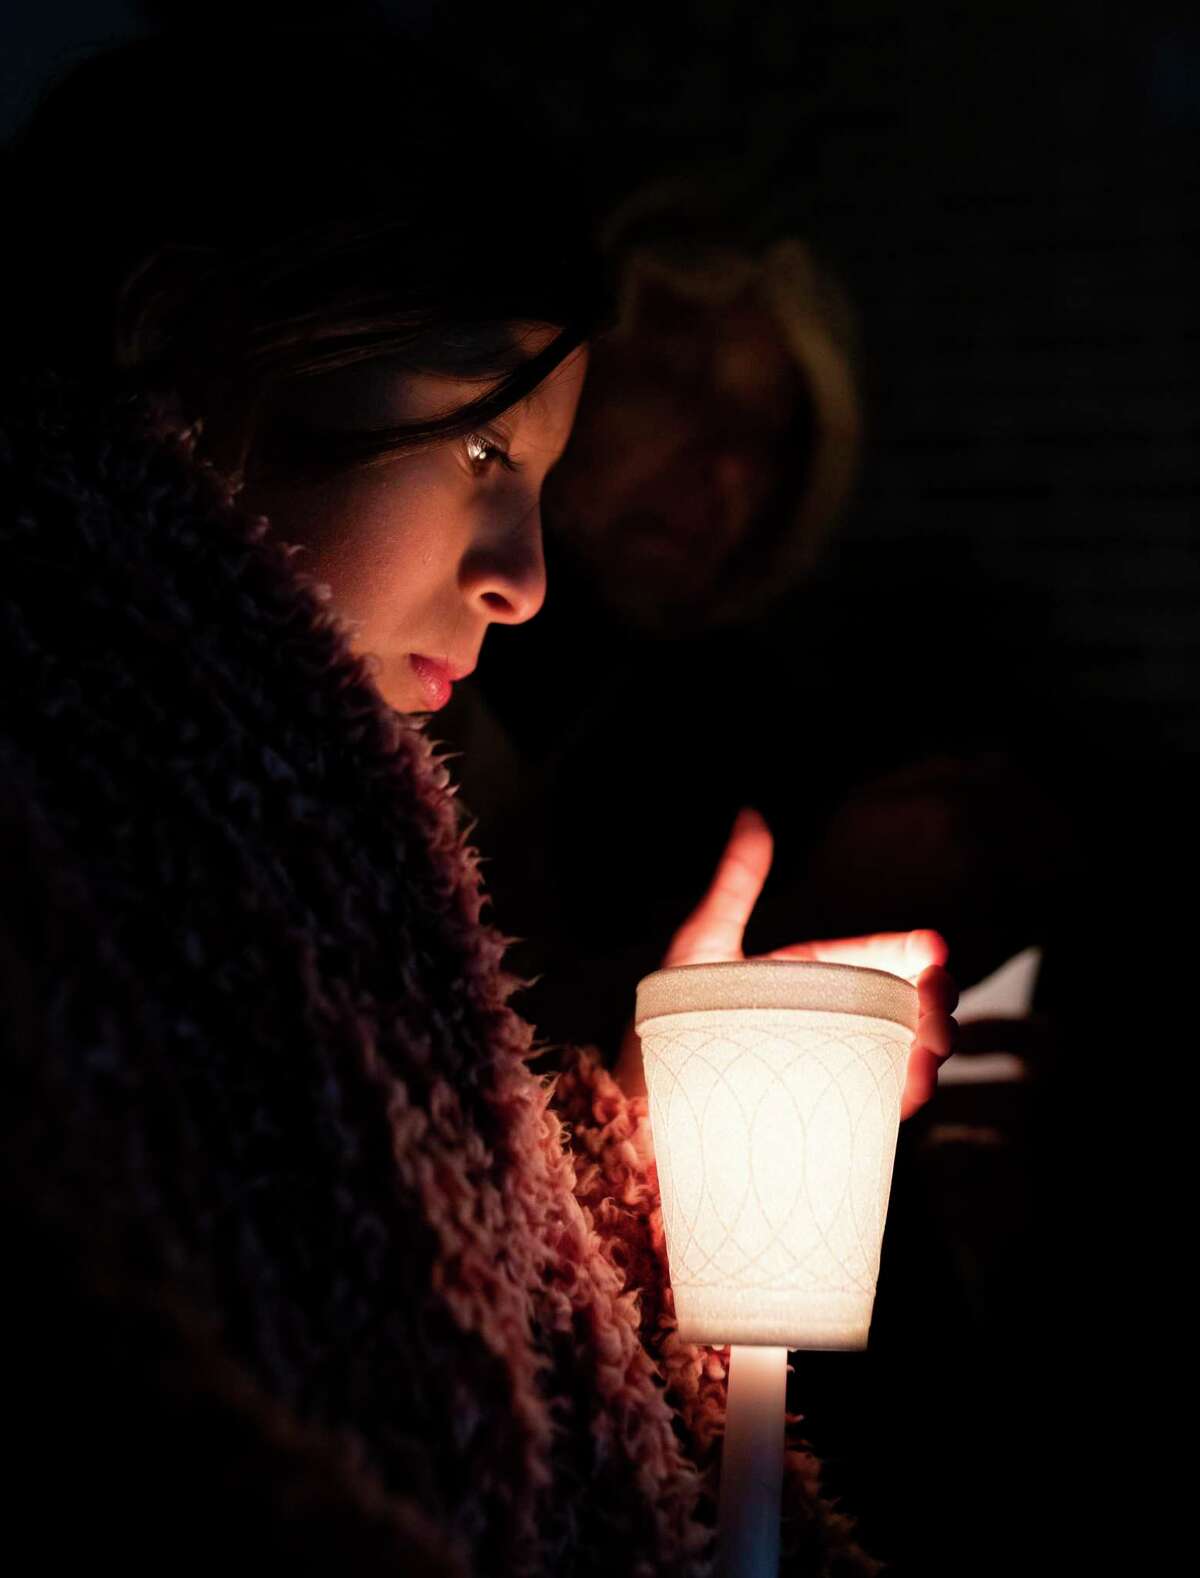 Shael Torres, 11, attends a vigil organized by The Texas Organizing Project at St. Agnes Catholic Church in San Antonio tonight in support DACA recipients and immigrant families on Monday, Nov. 11, 2019. Tomorrow the U.S. Supreme Court will hear arguments on the termination of DACA and will decide whether to uphold or strike down the program.